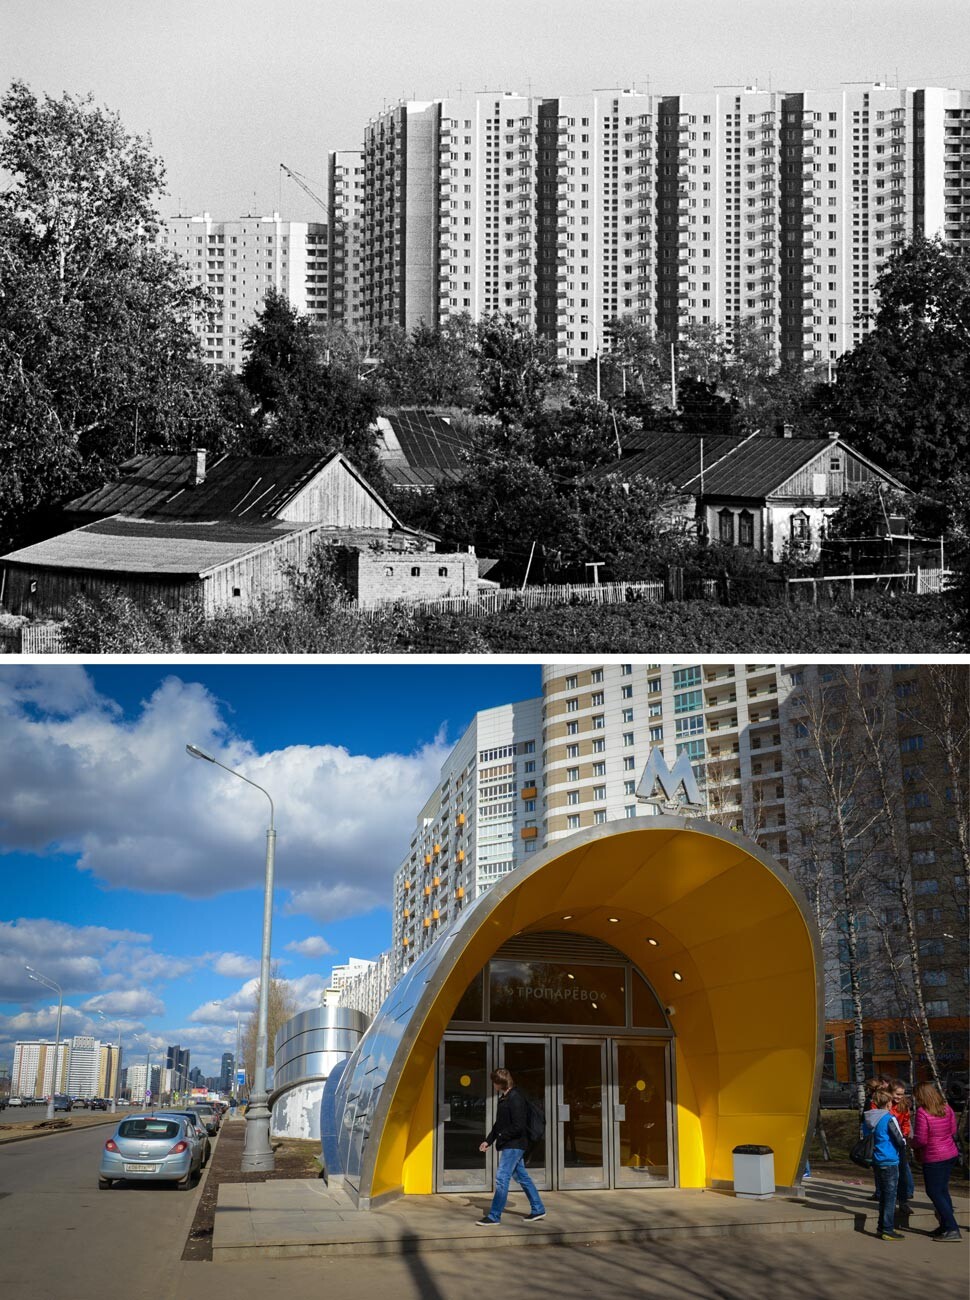 Above: Wooden houses of the Troparevo village, 1978. Below: Troparevo metro station, 2019.